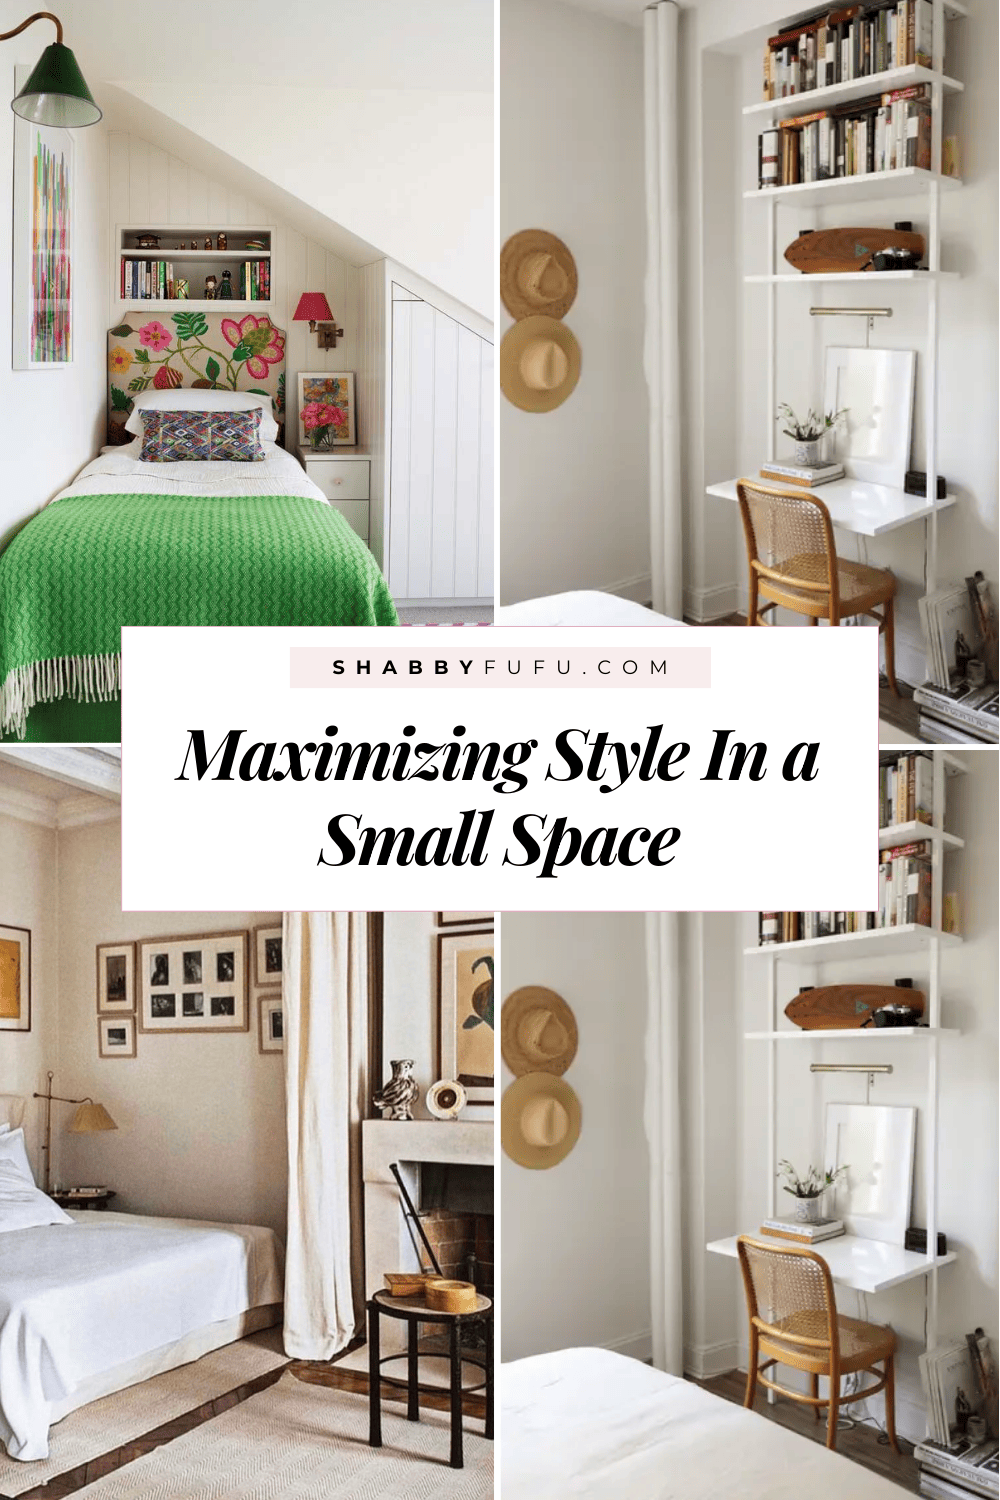 Pinterest decorative graphic collage featuring images of interiors titled "Maximizing Style In A Small Space"